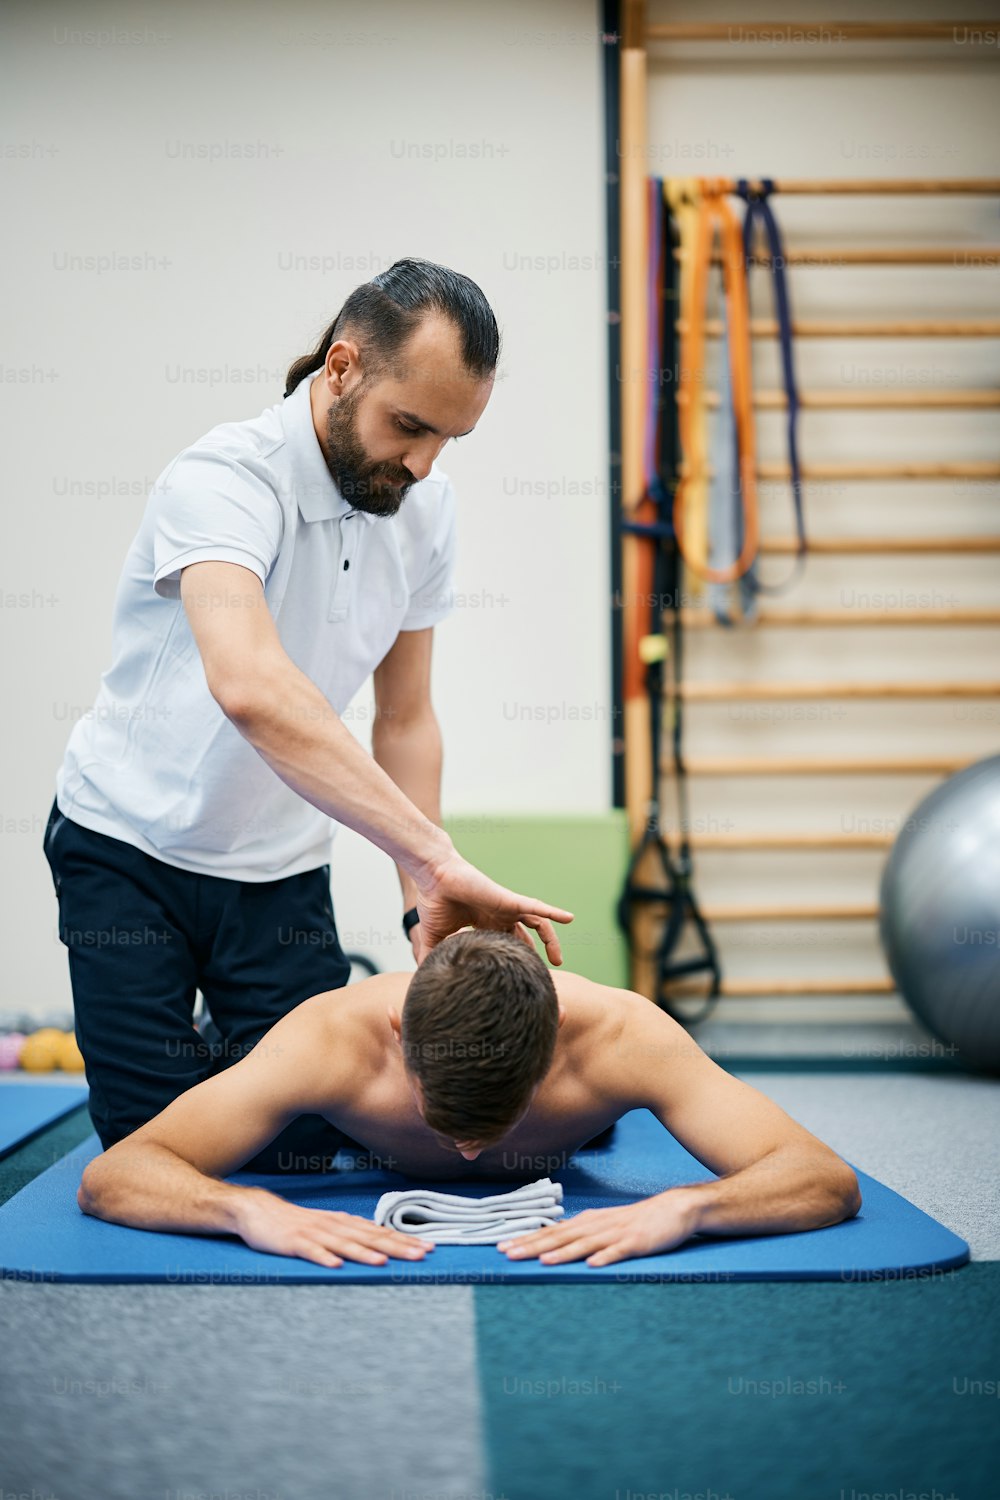 Physical therapist massaging athlete's neck during rehabilitation treatment at health club.